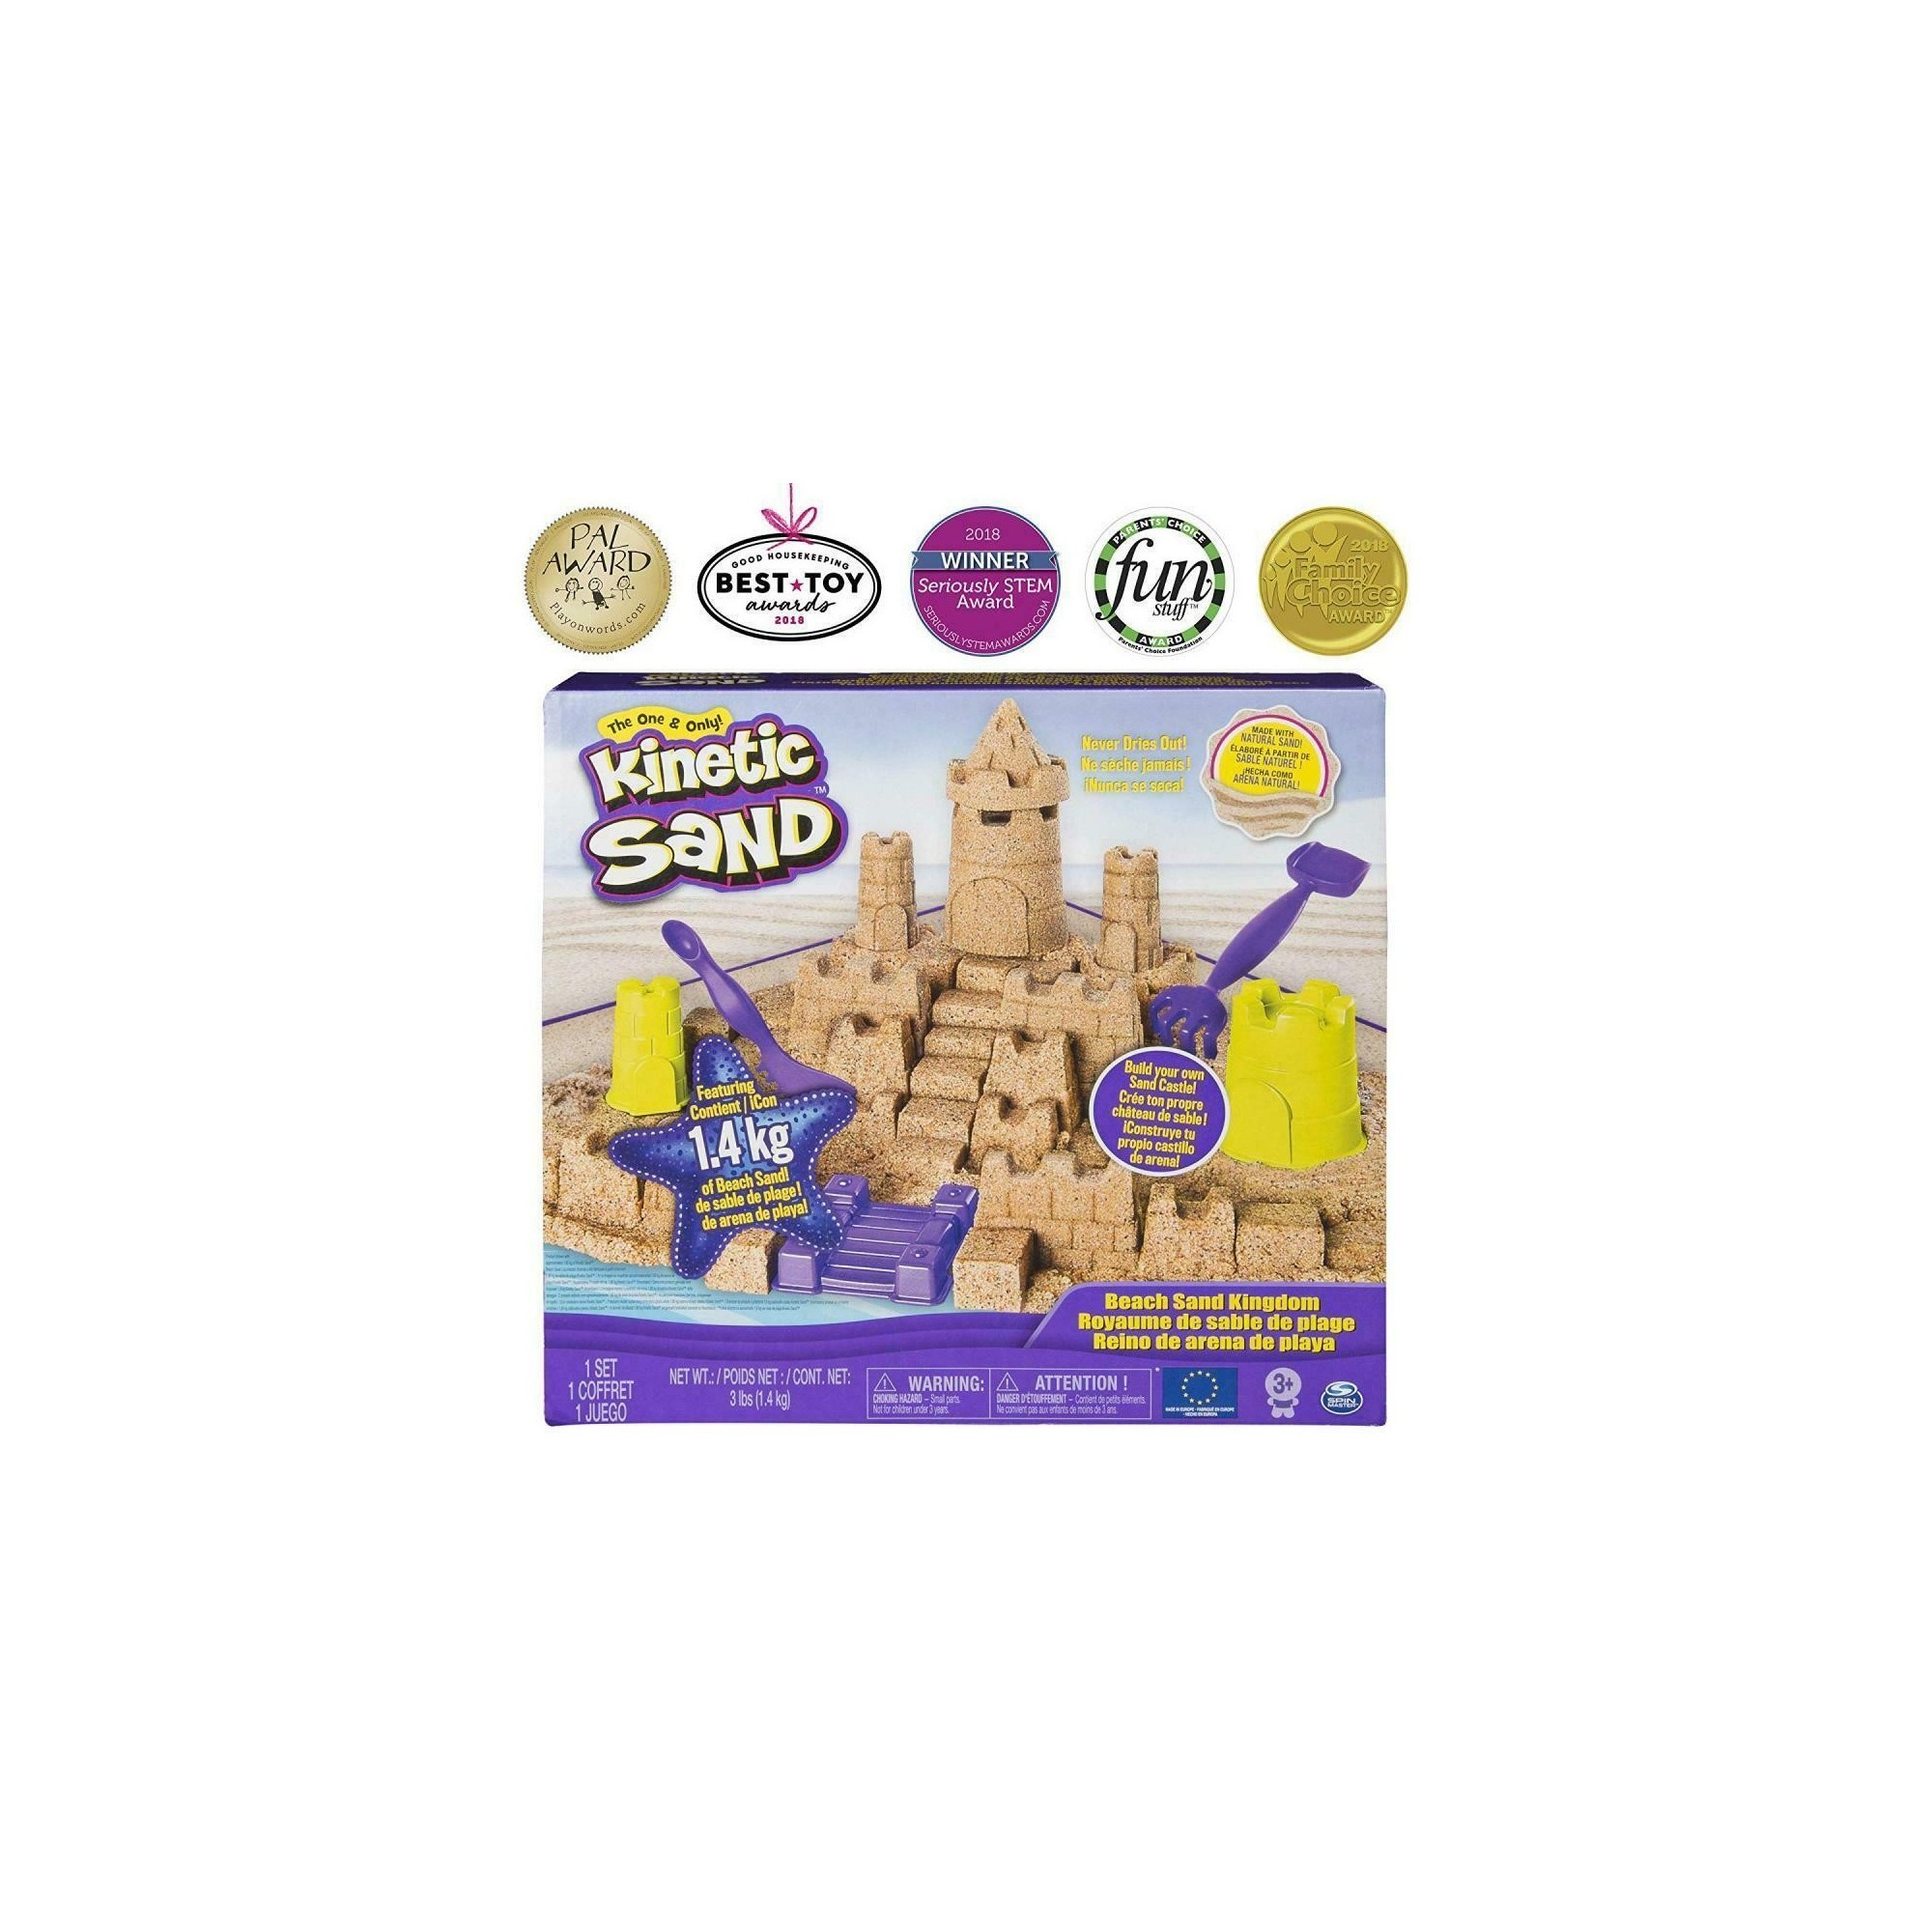 for Ages 3 and Kinetic Sand Beach Sand Kingdom Playset with 3lbs of Beach Sand